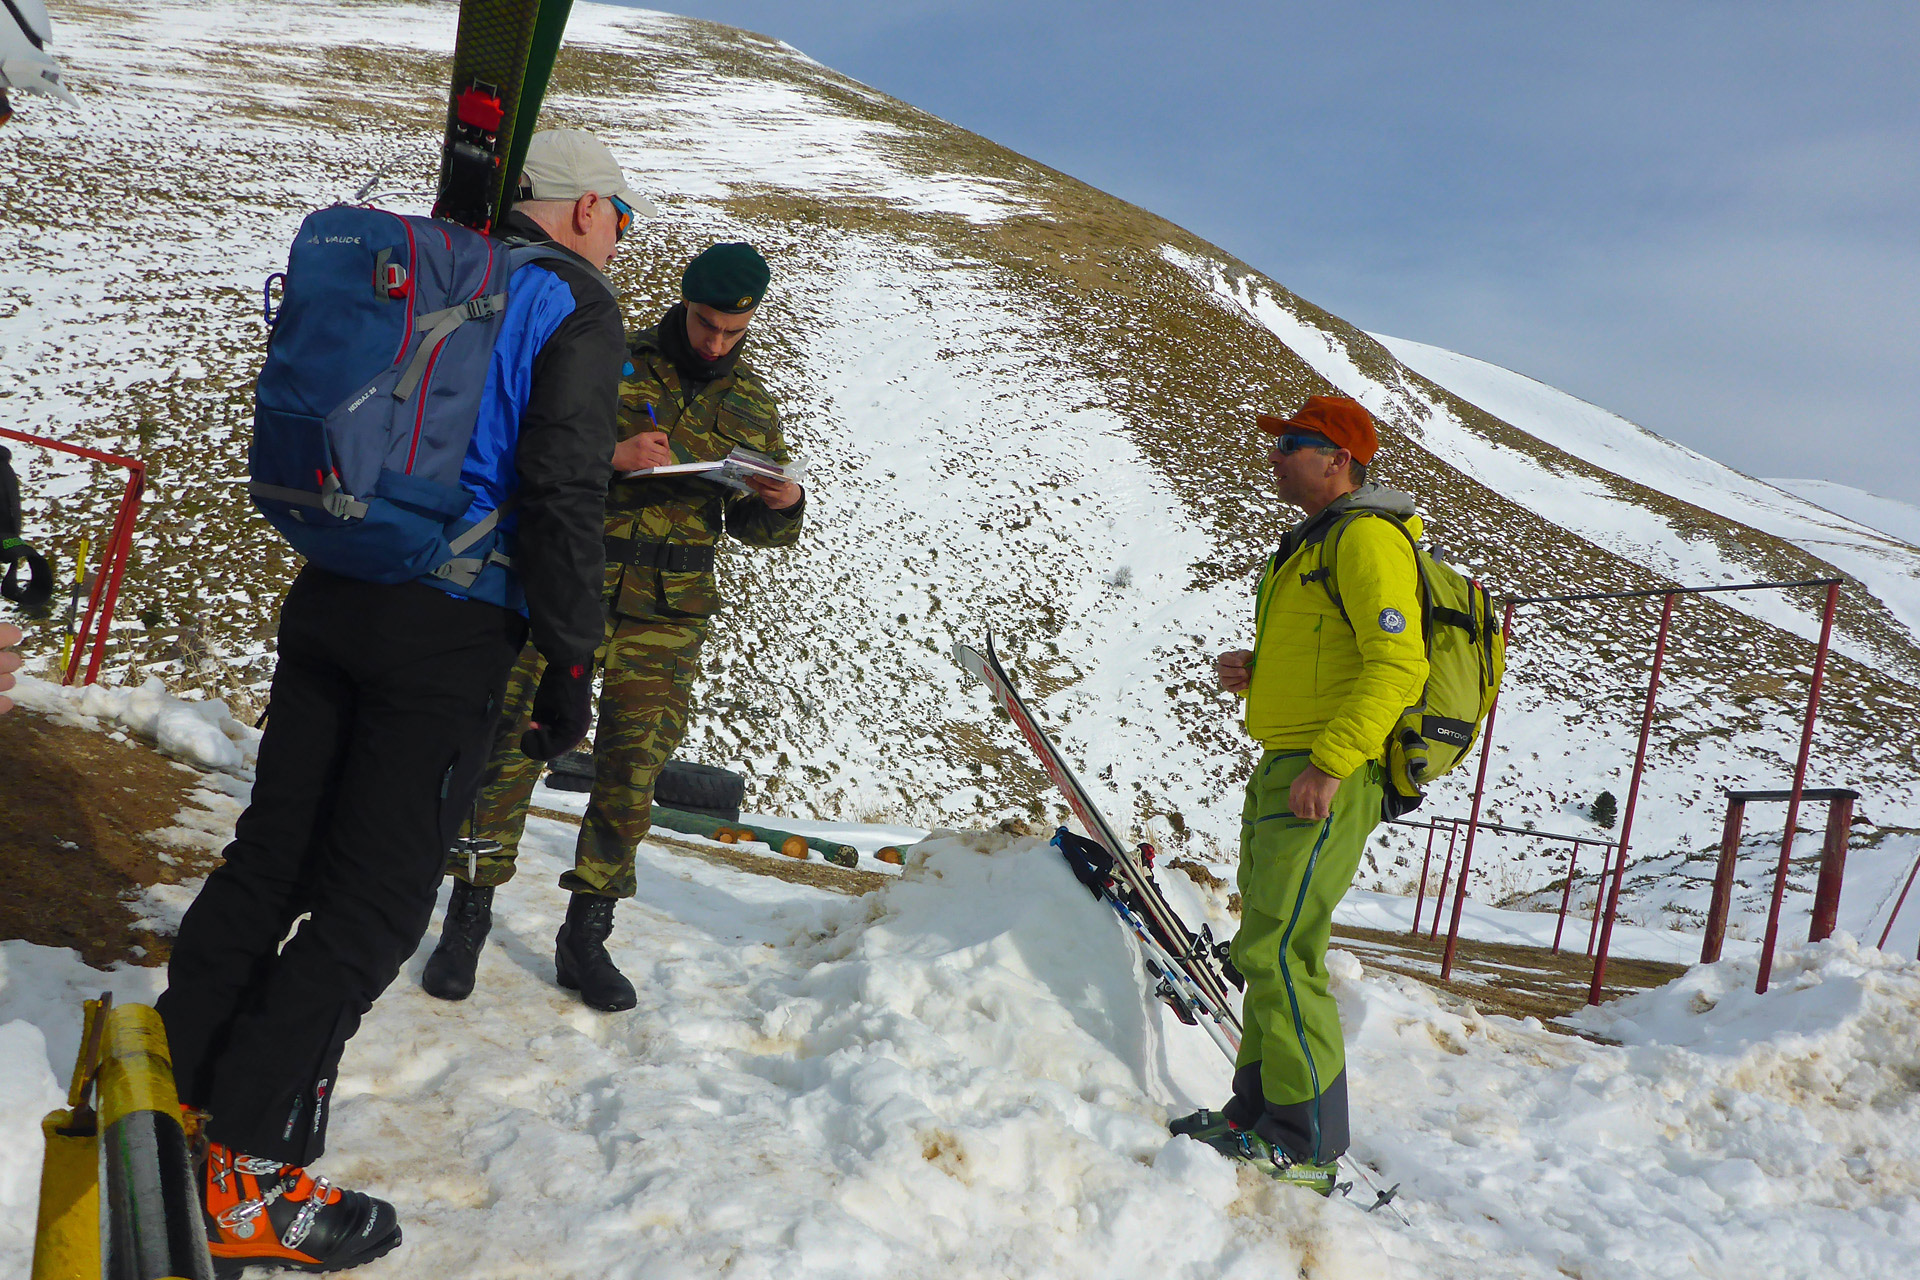 A Greek Special Forces soldier signing in skiers on Mt Olympus